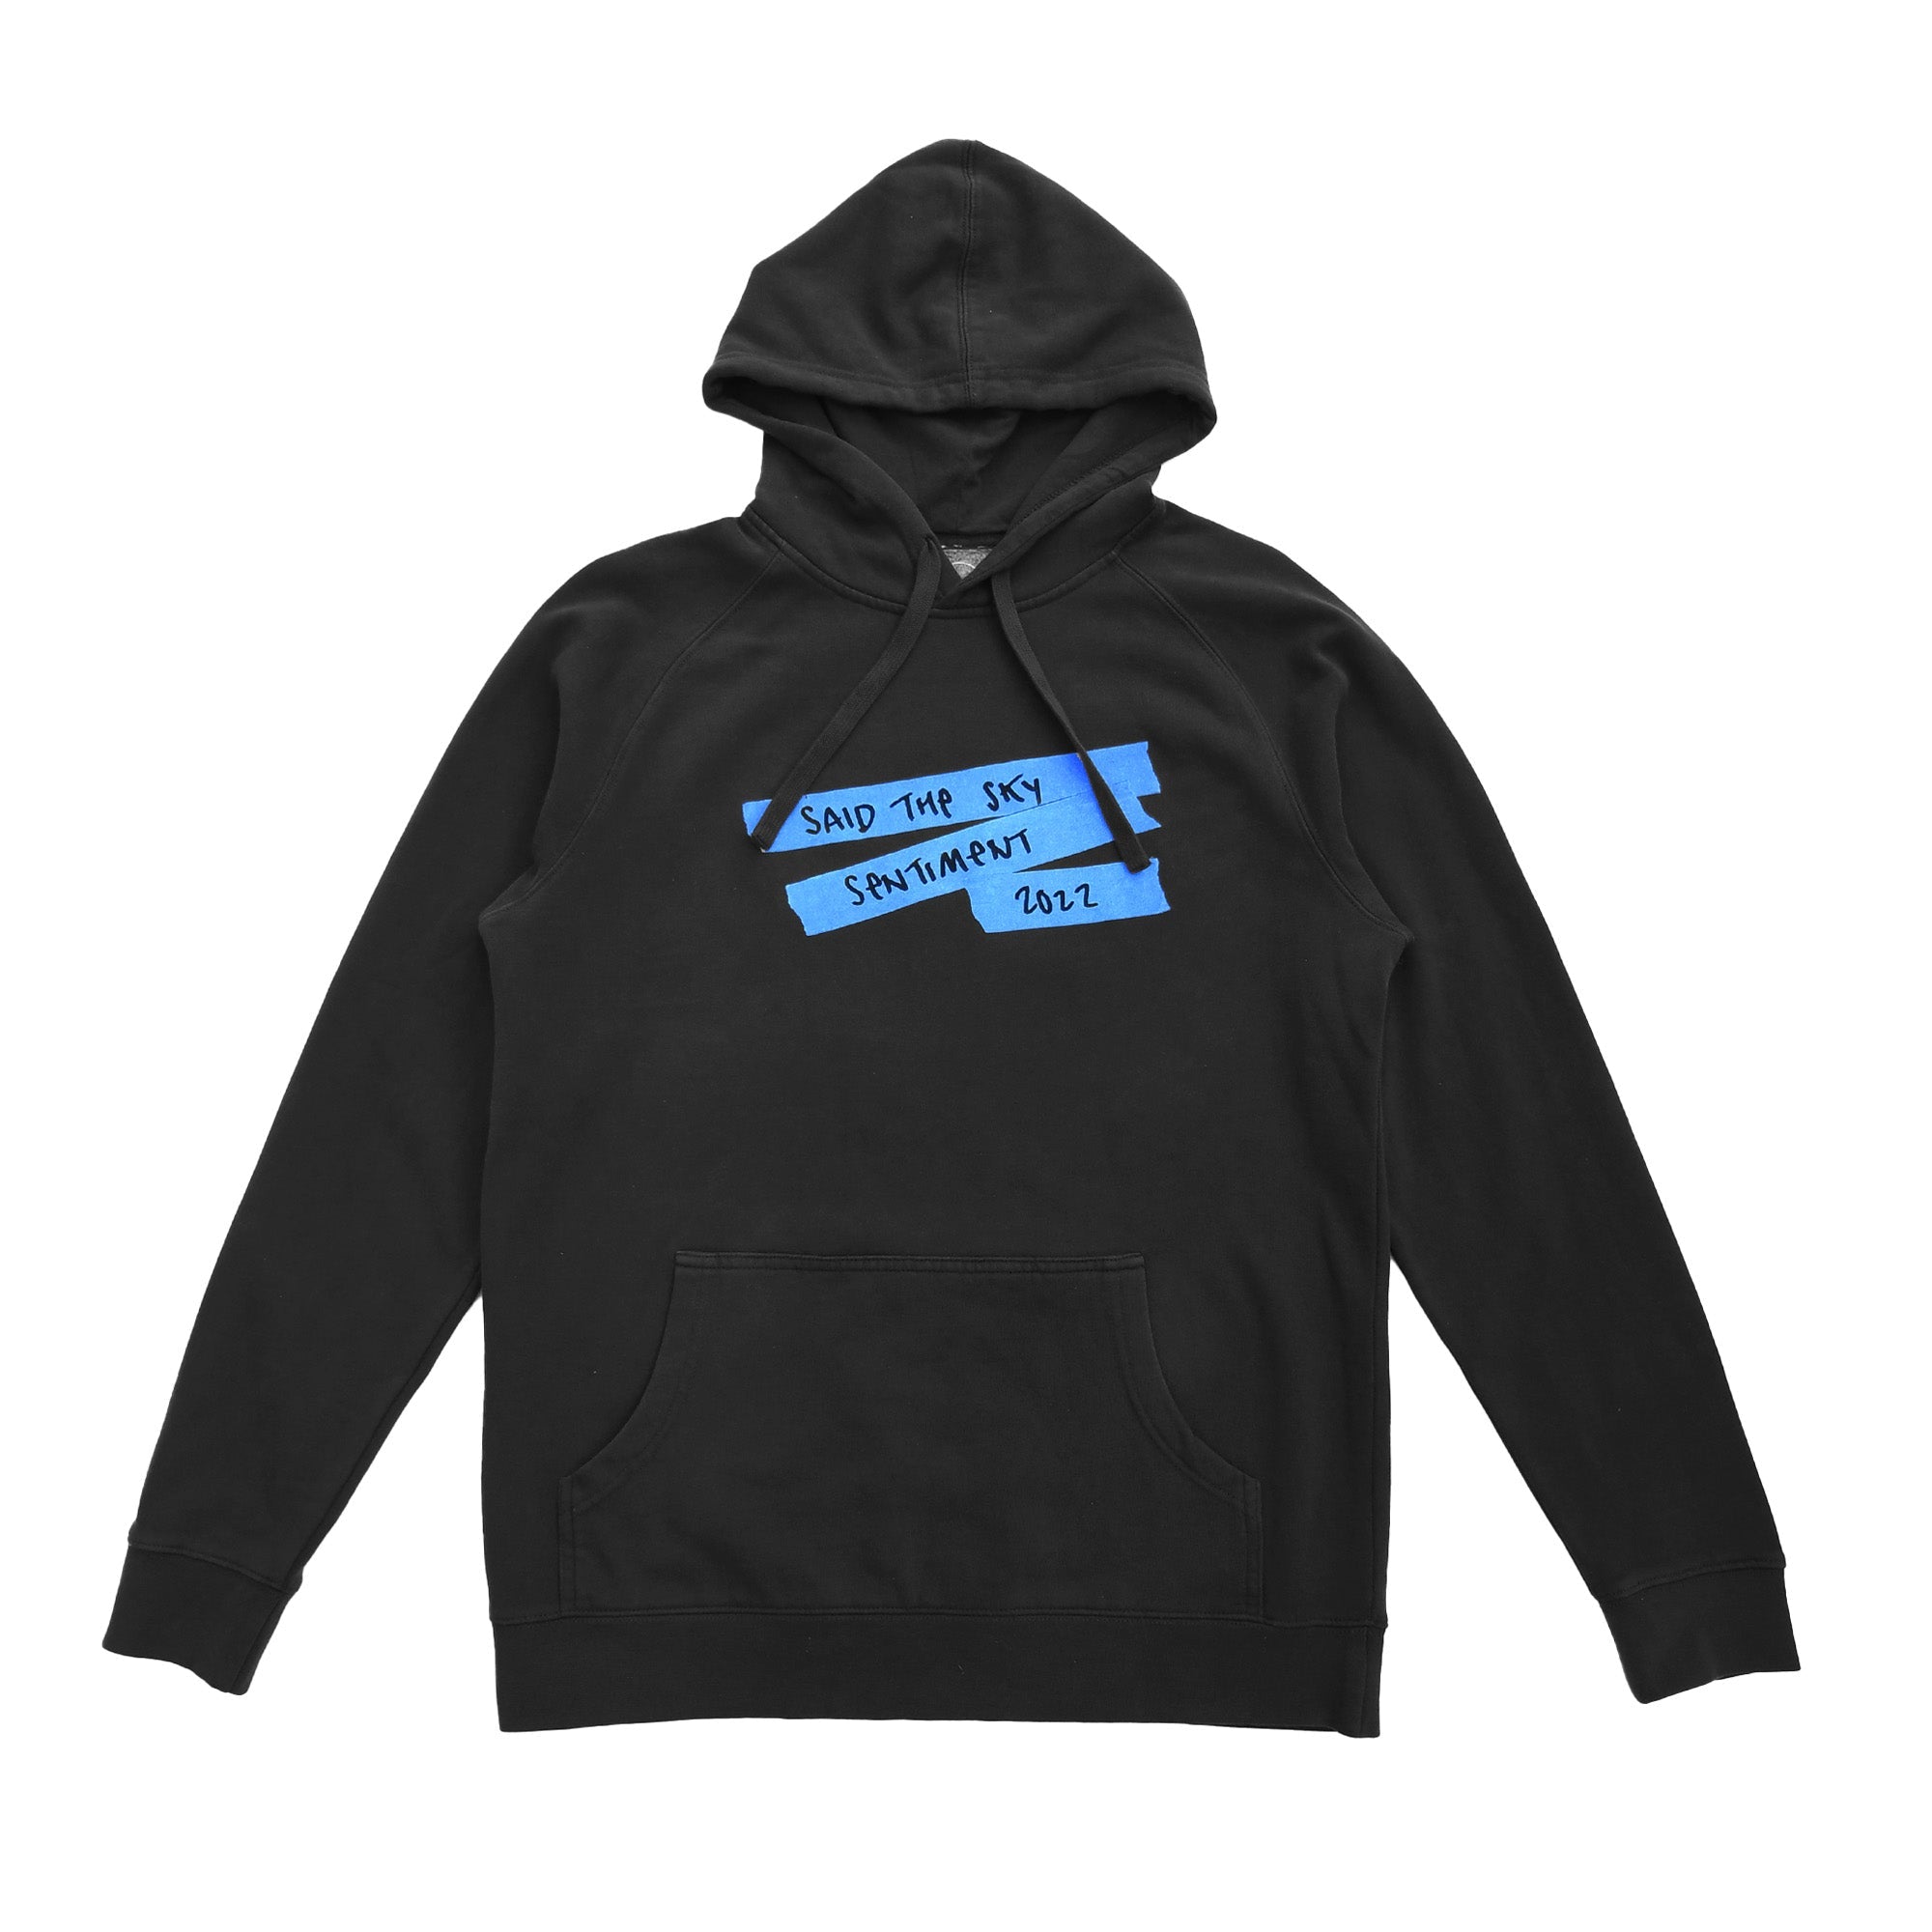 Sentiment Tour Hoodie - Black - Hoodie -  Said the Sky-  Electric Family Official Artist Merchandise